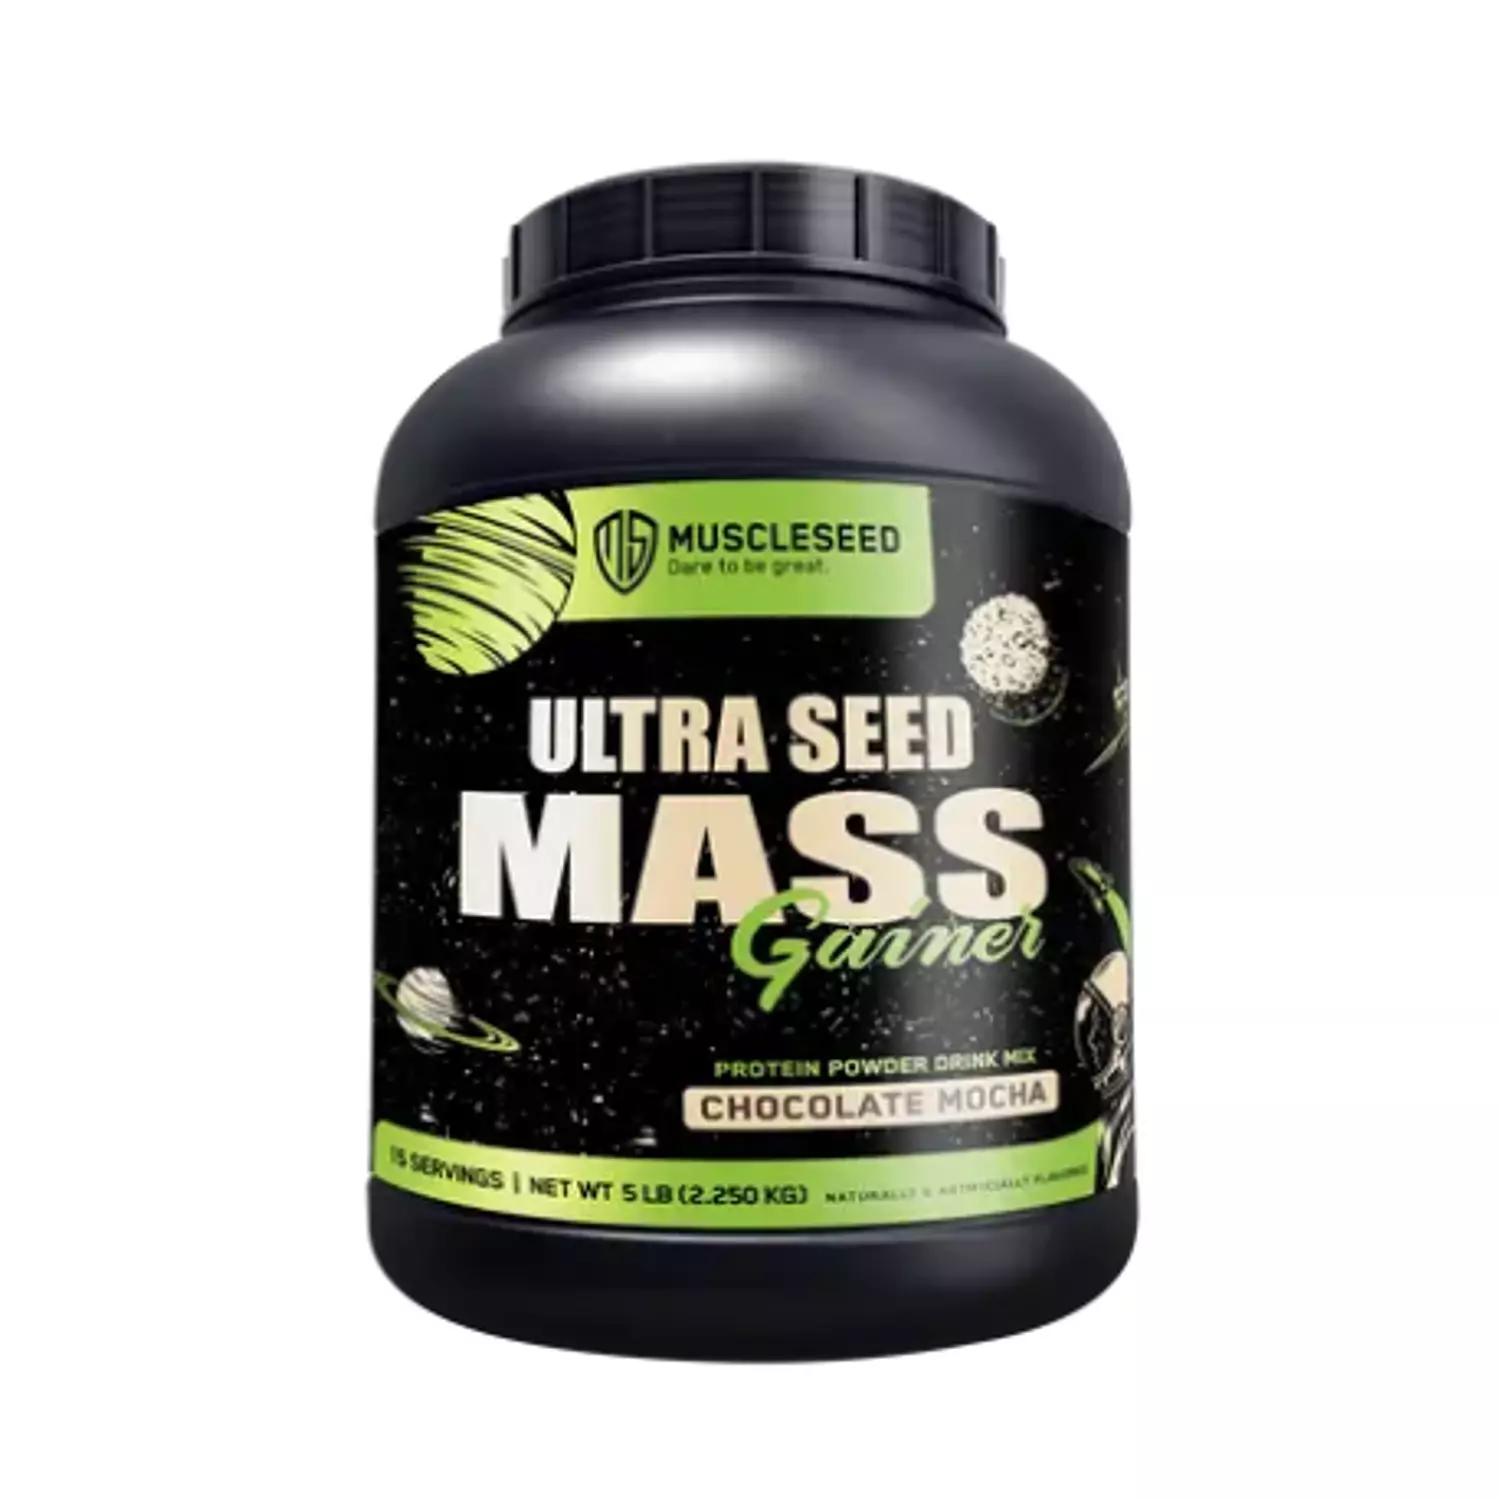 Ultra Seed Mass Gainer  hover image